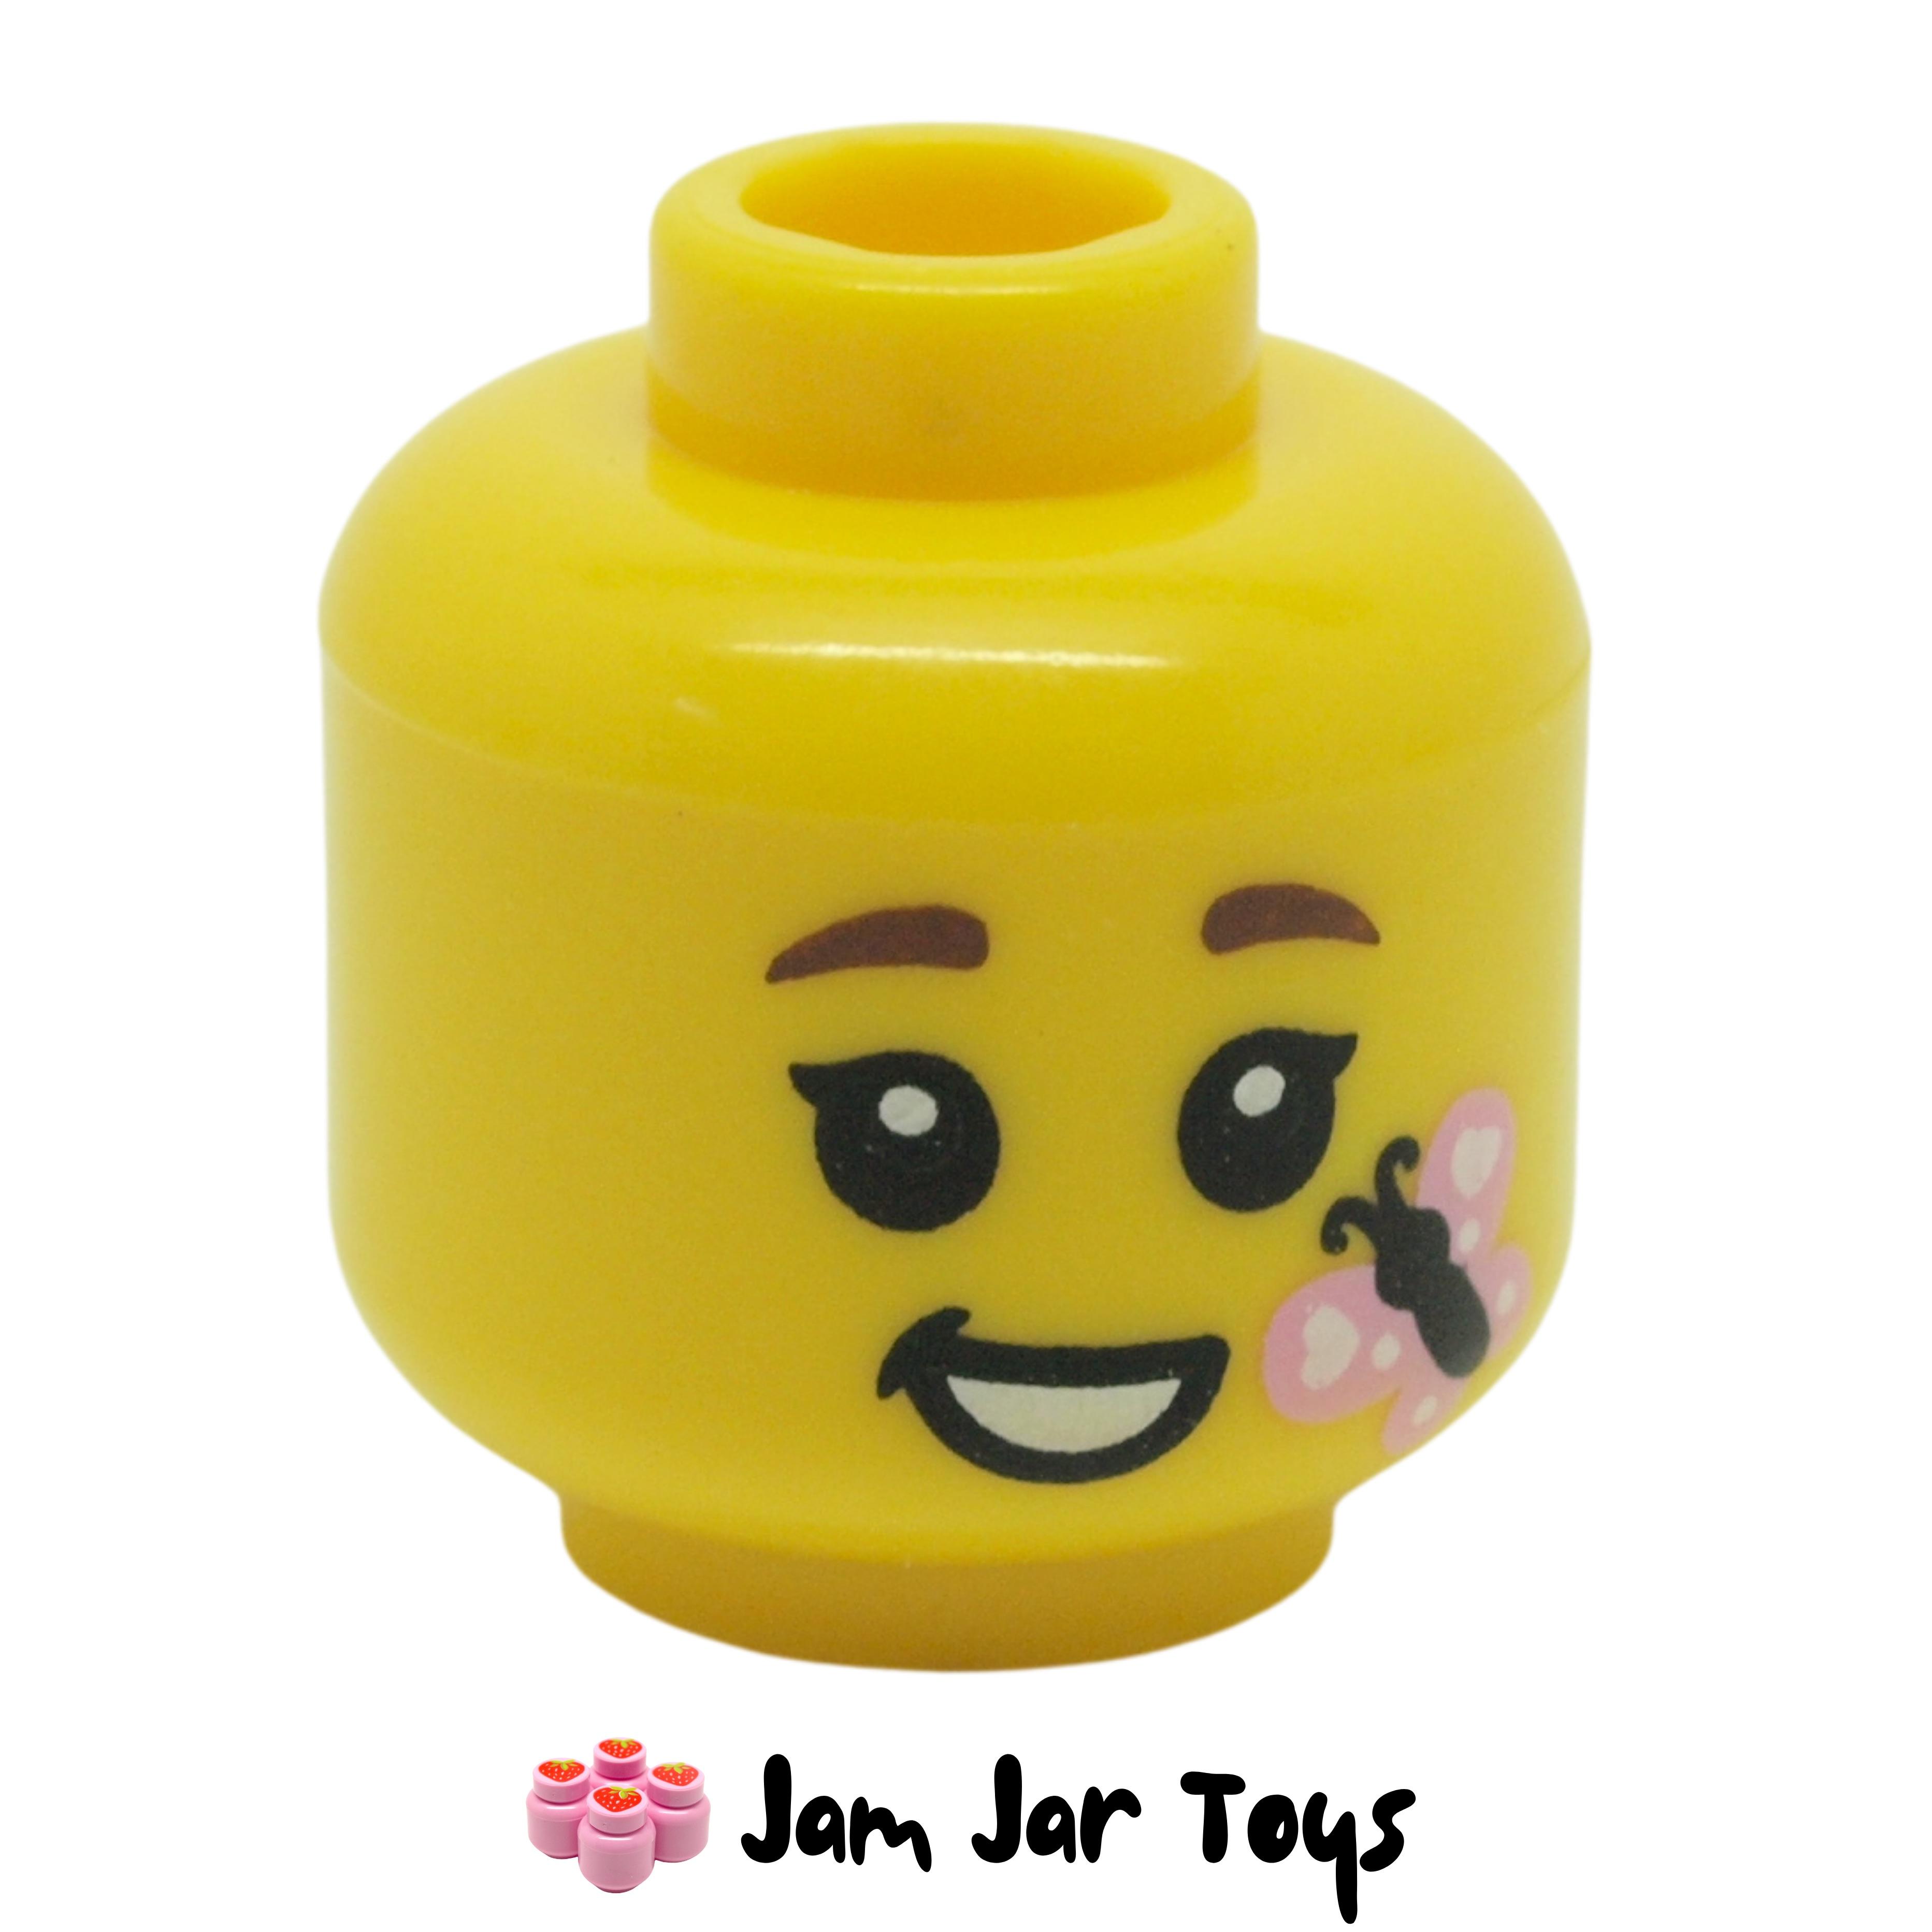 Lego Yellow Minifig Head Dual Sided Black Eyebrows Wide Open Smile Teeth Tongue 